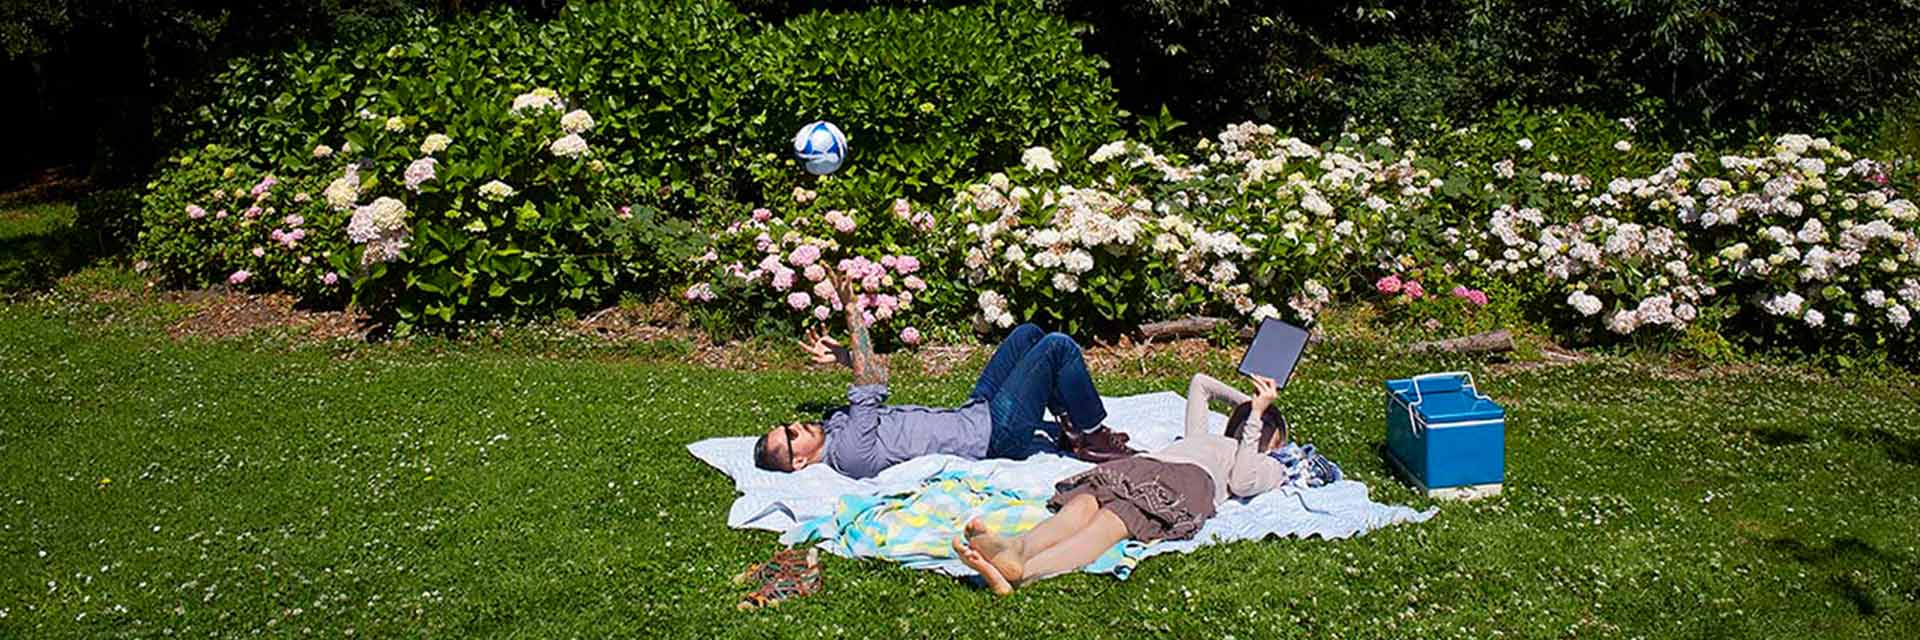 A man and woman lay on a picnic blanket in a park.